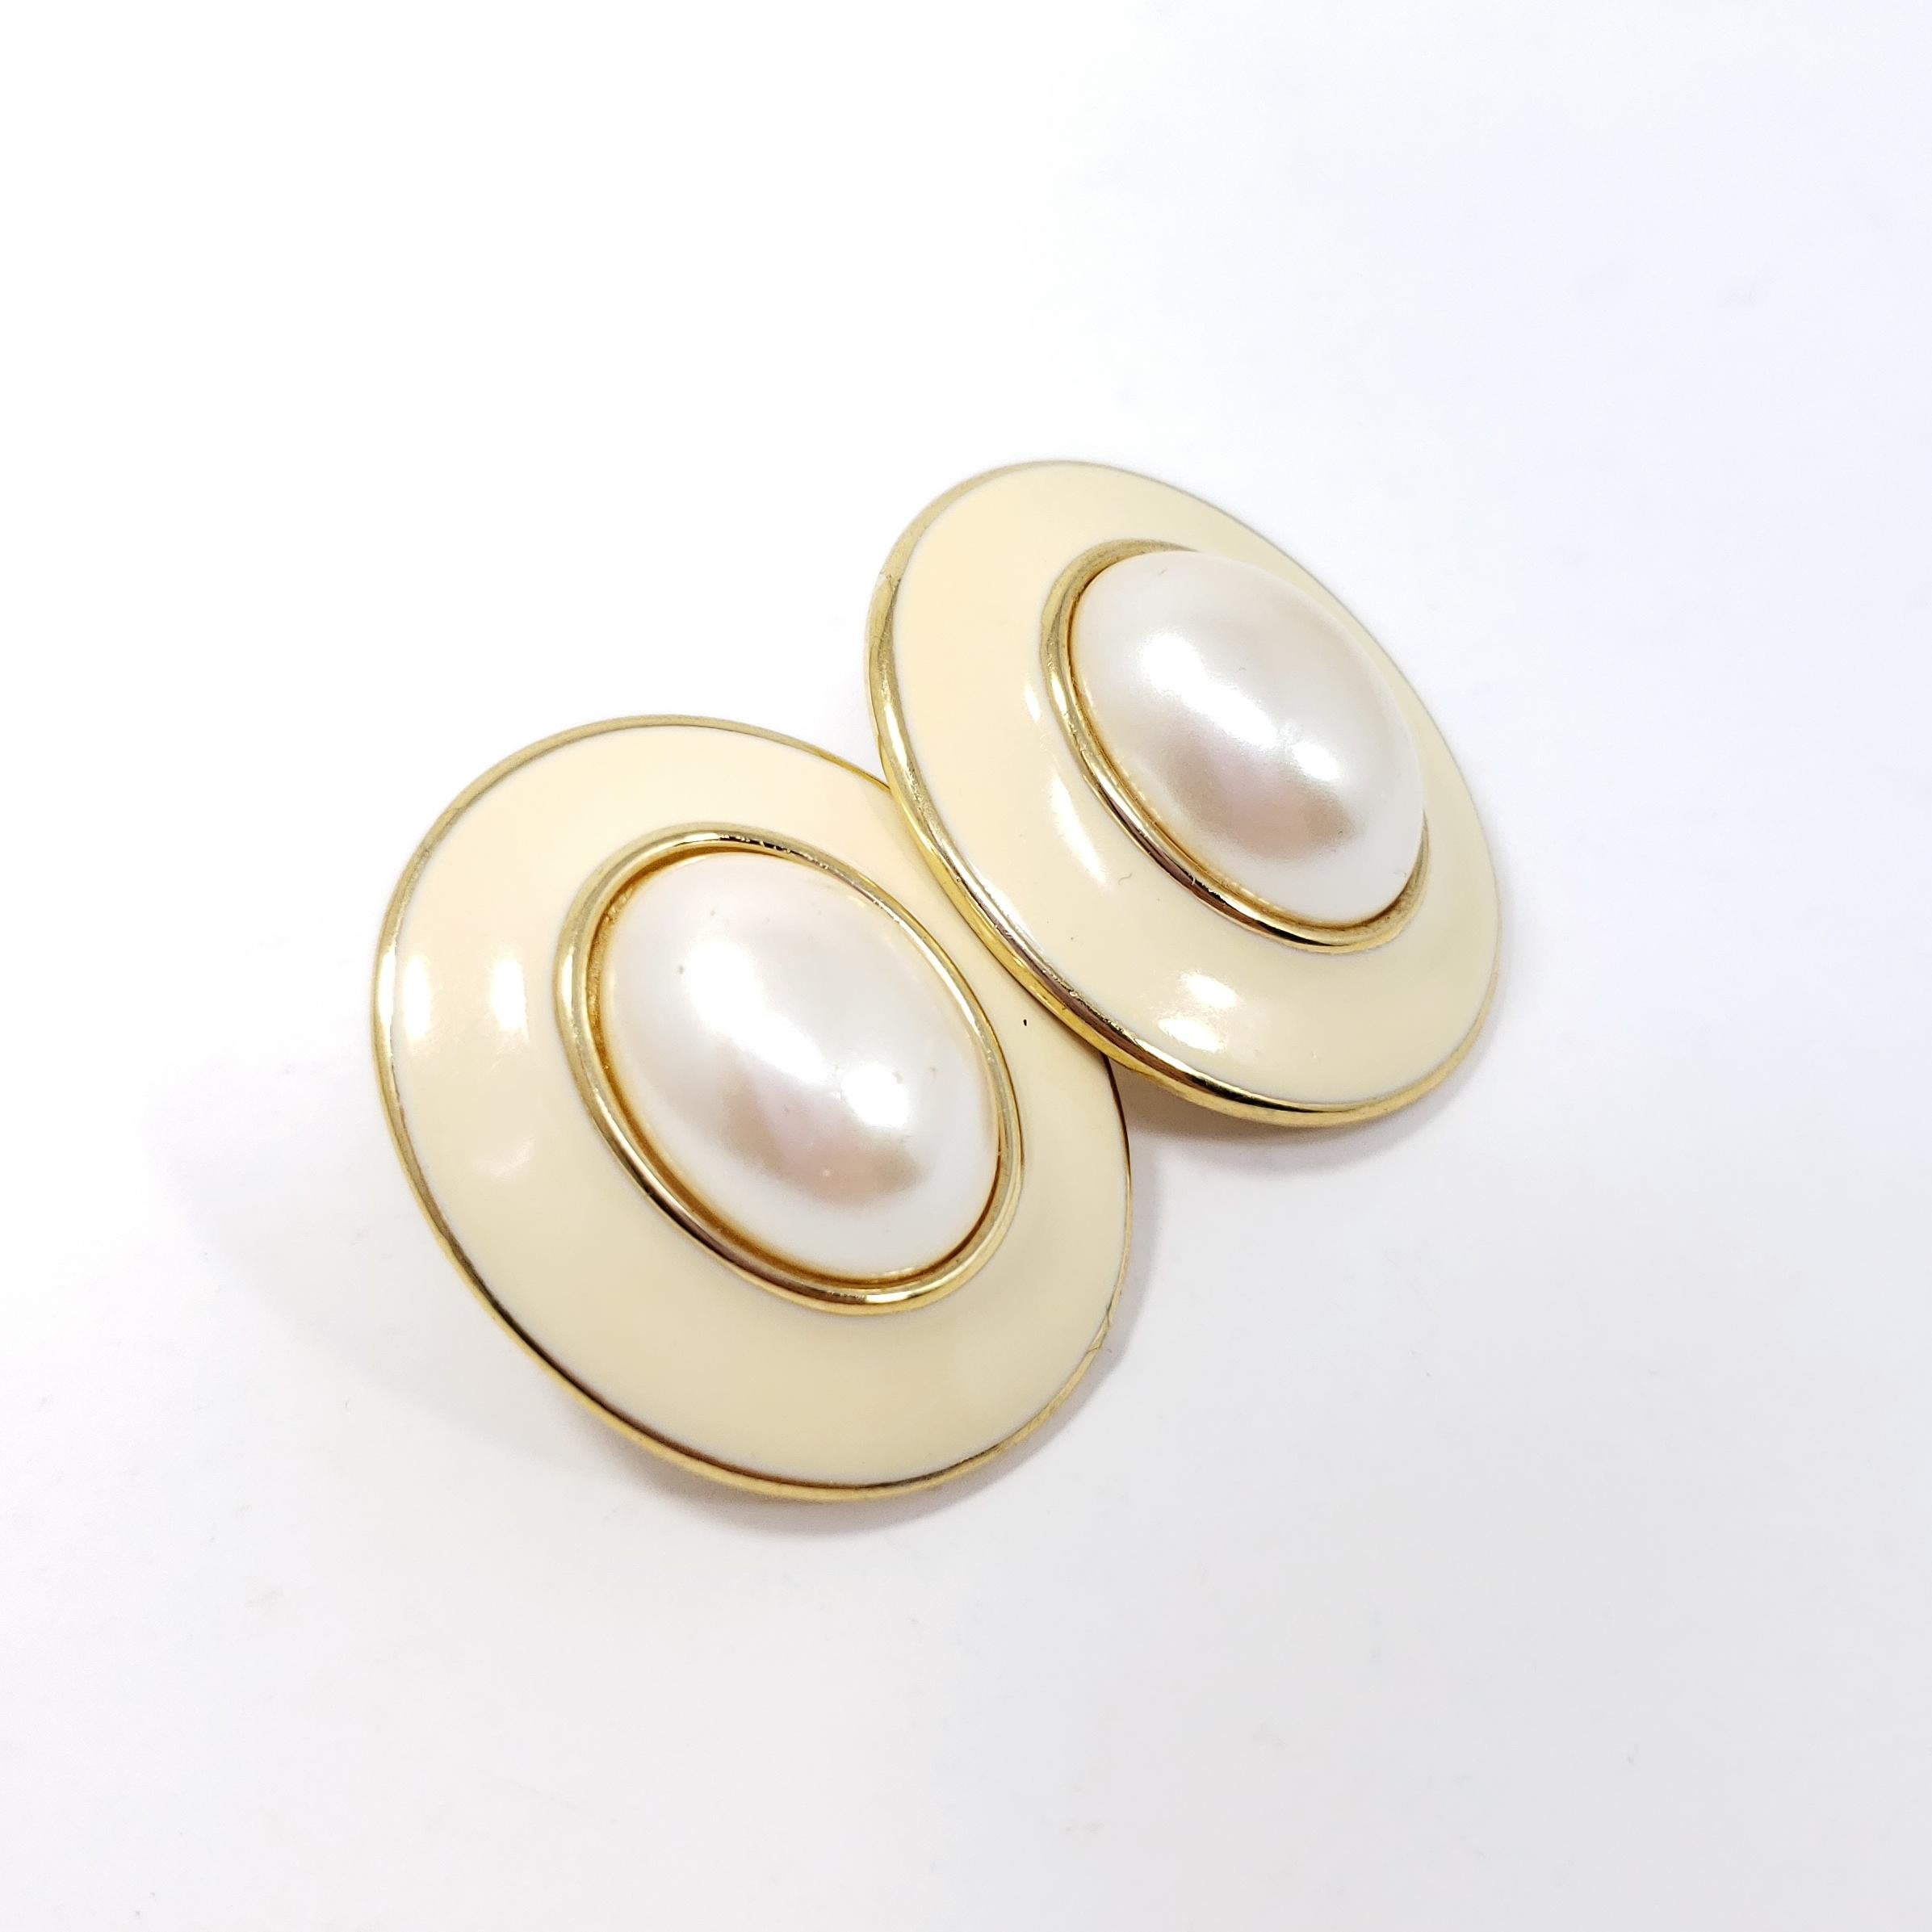 Big and bold, a pair of chunky clip on earrings. Stylish retro flair!

Latte / off white enamel and faux pearl center cabochon. Gold plated.

Late 1900s.

Marks / hallmarks / etc: Monet